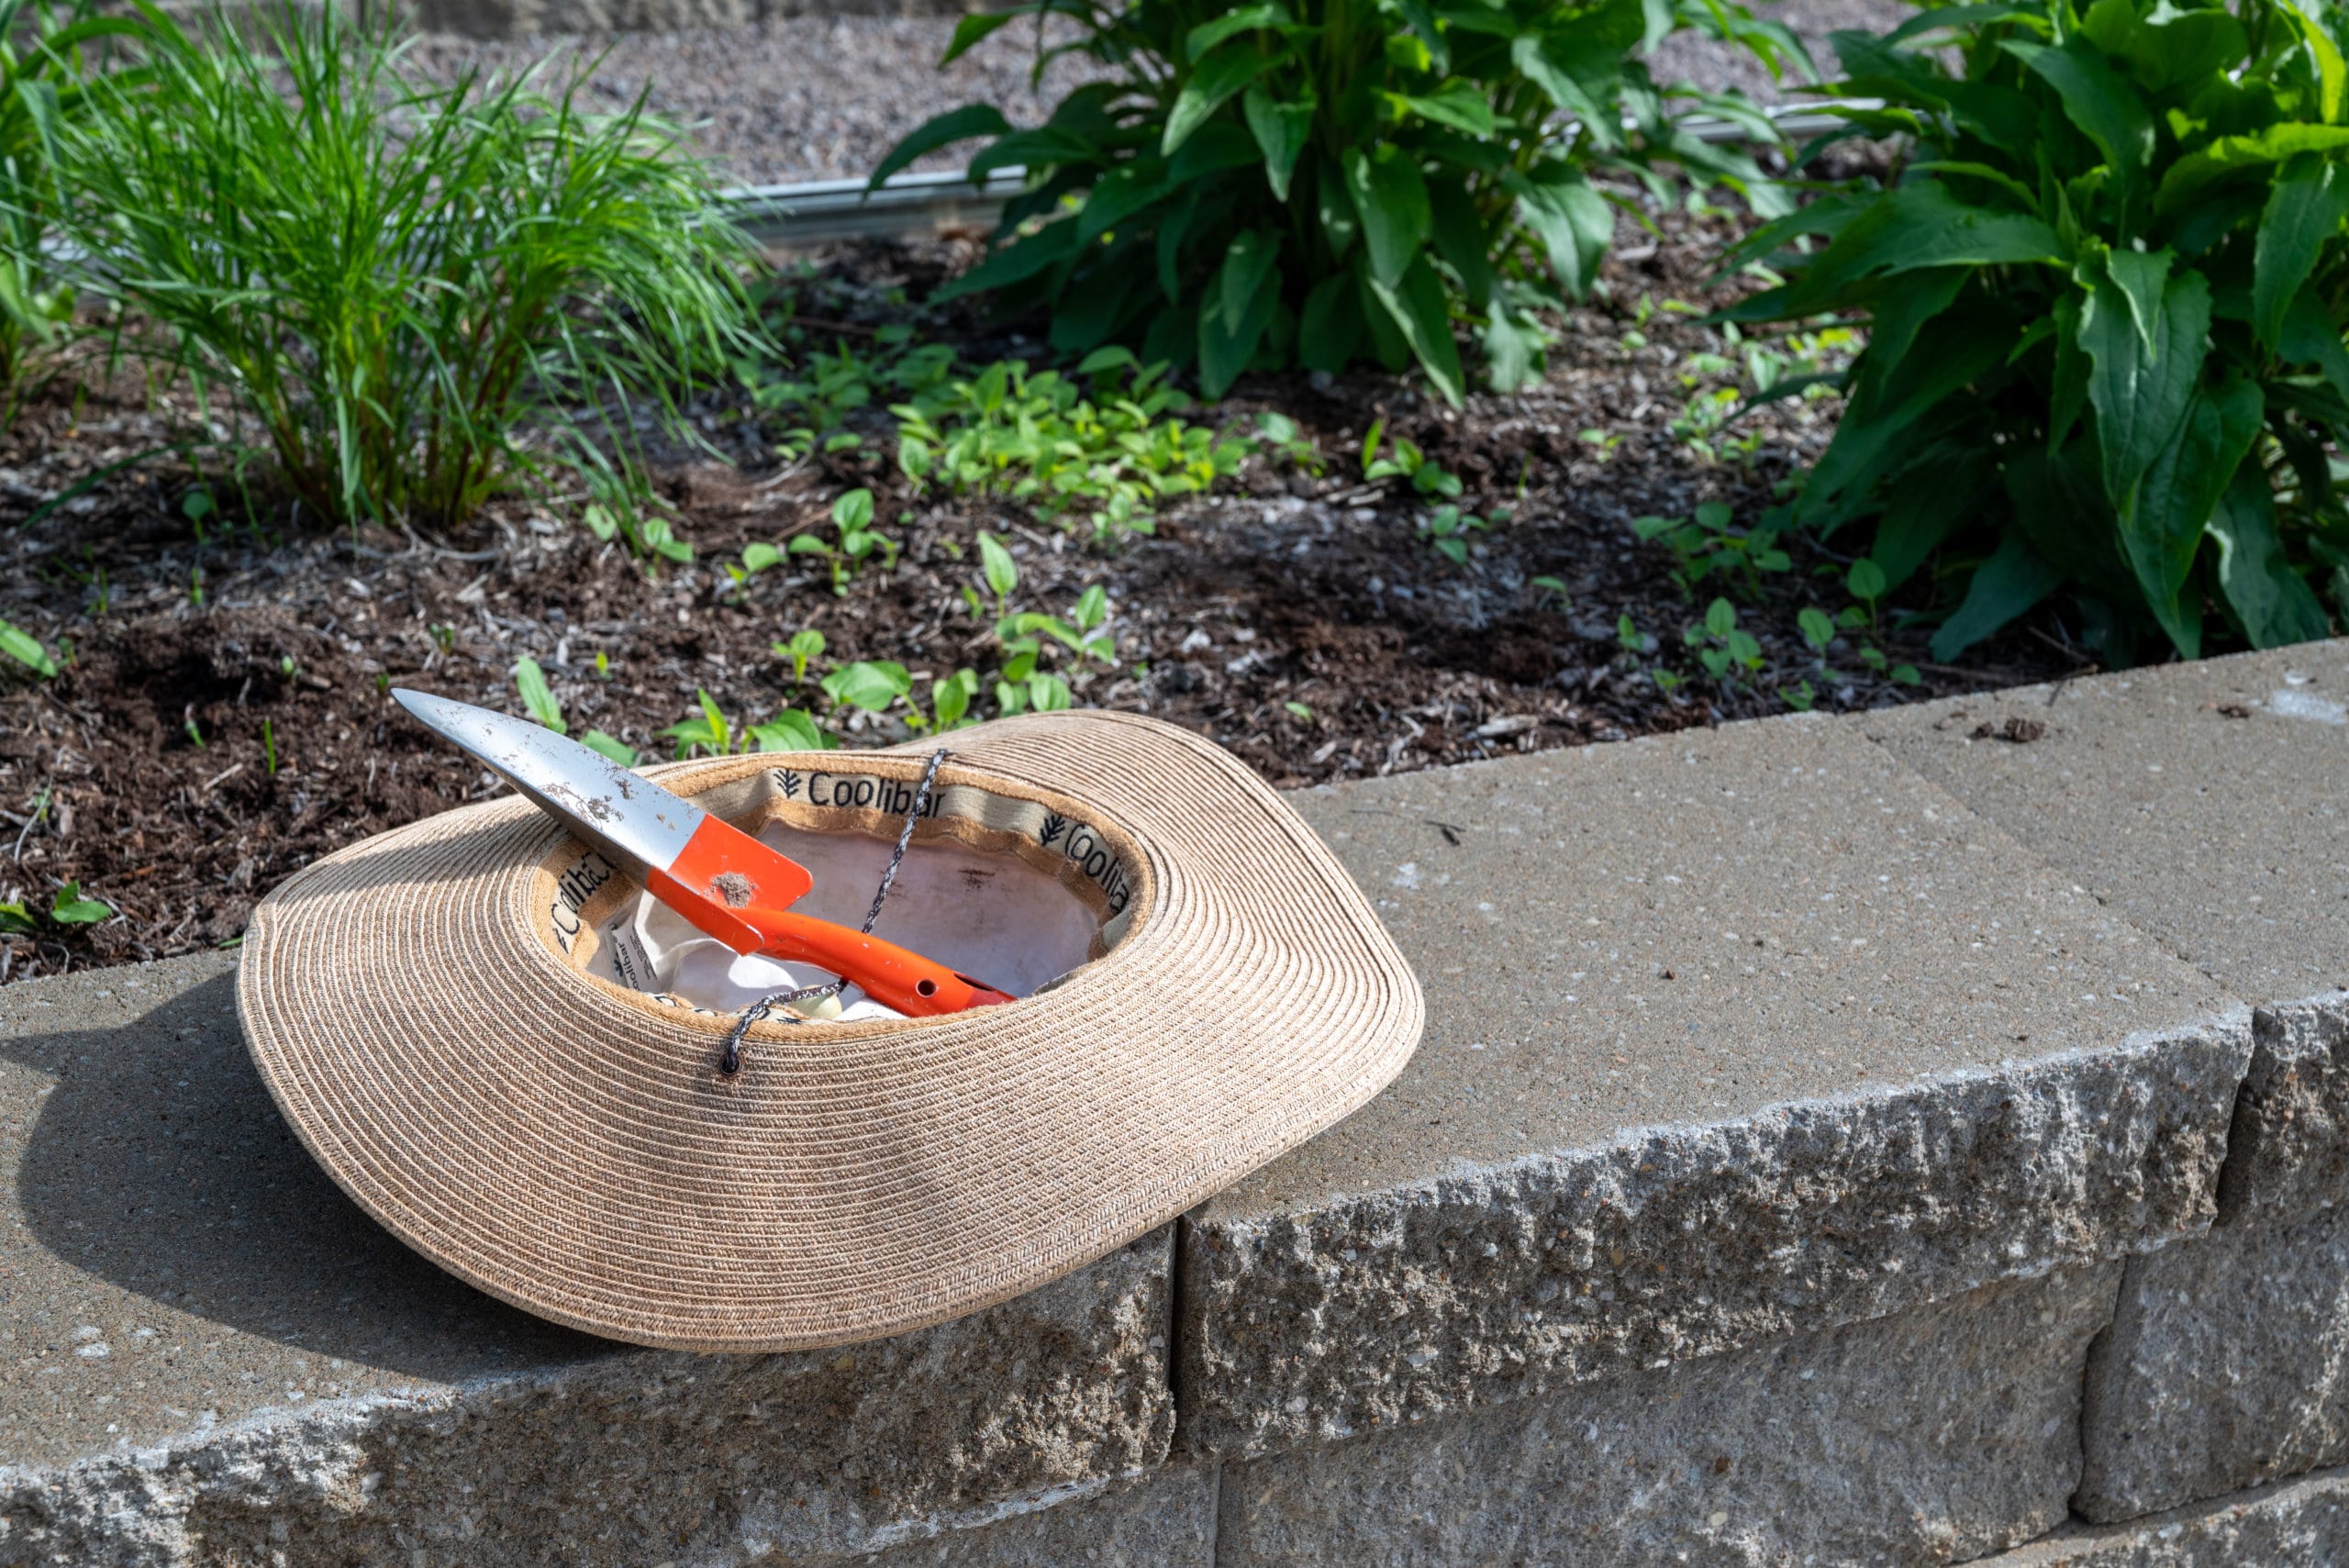 A gardening hat and spade rest on the paver stones at the GHV embankment